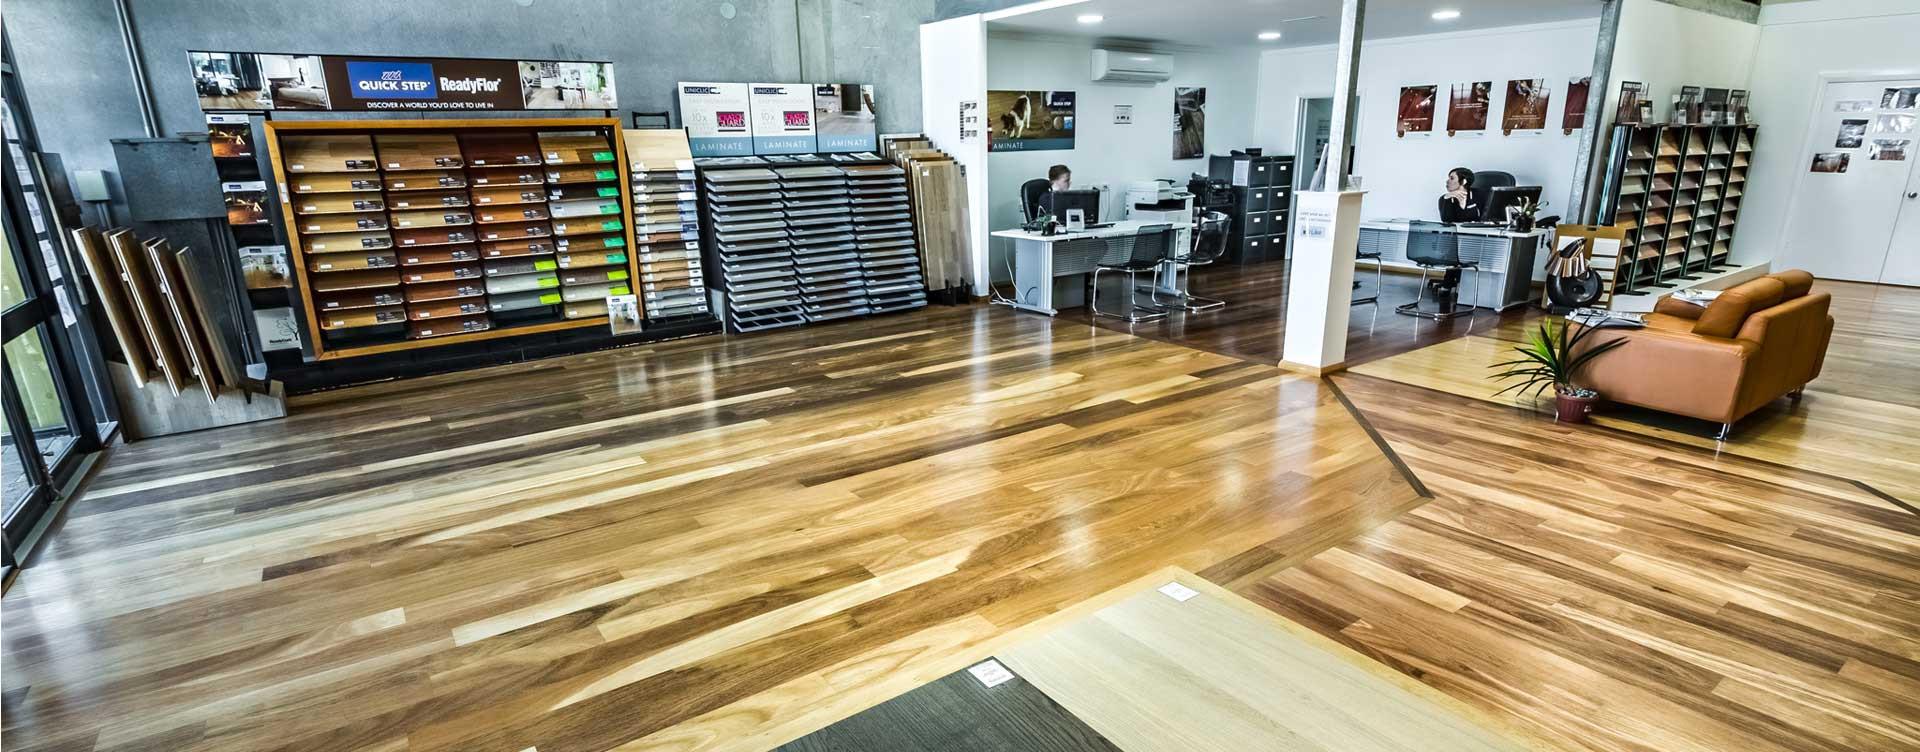 13 Lovable Hardwood Flooring Vs Laminate Flooring Cost 2022 free download hardwood flooring vs laminate flooring cost of timber flooring perth coastal flooring wa quality wooden pertaining to thats why they call us the home of fine wood floors